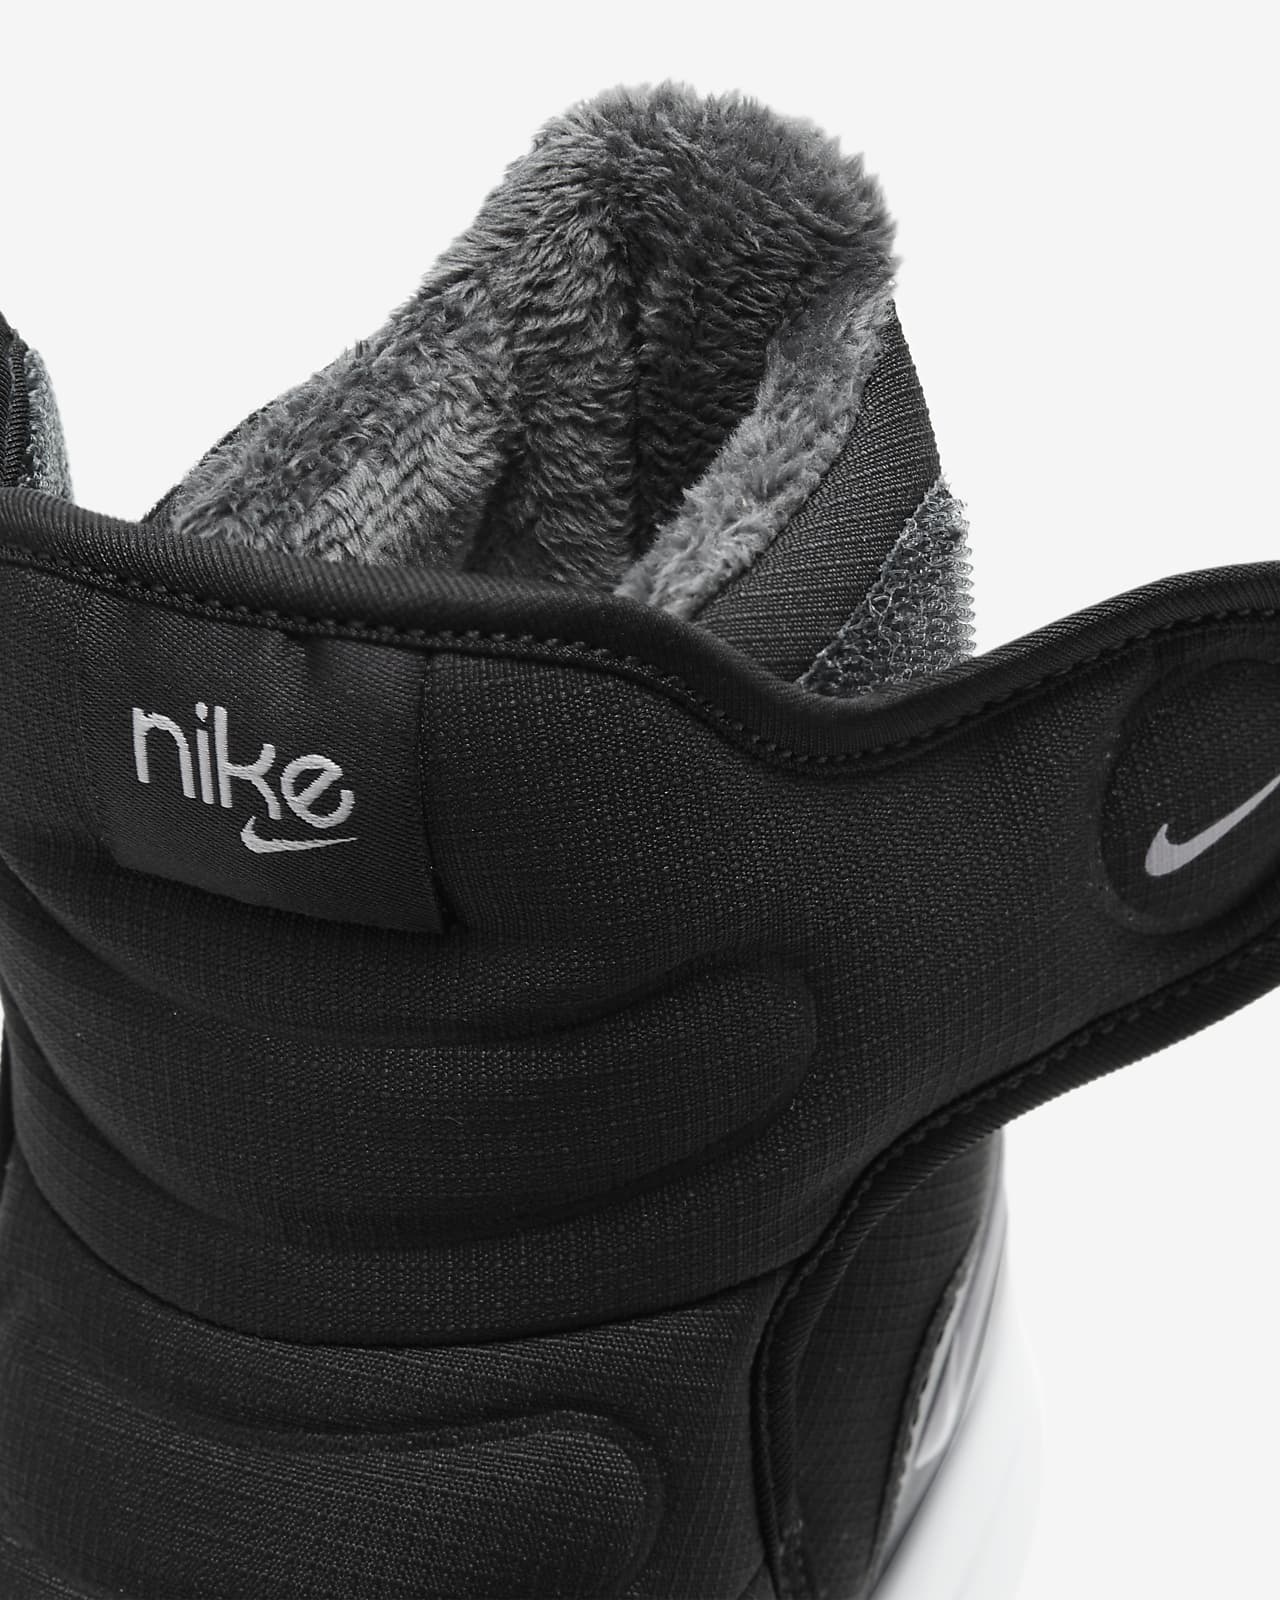 nike snow boots toddler